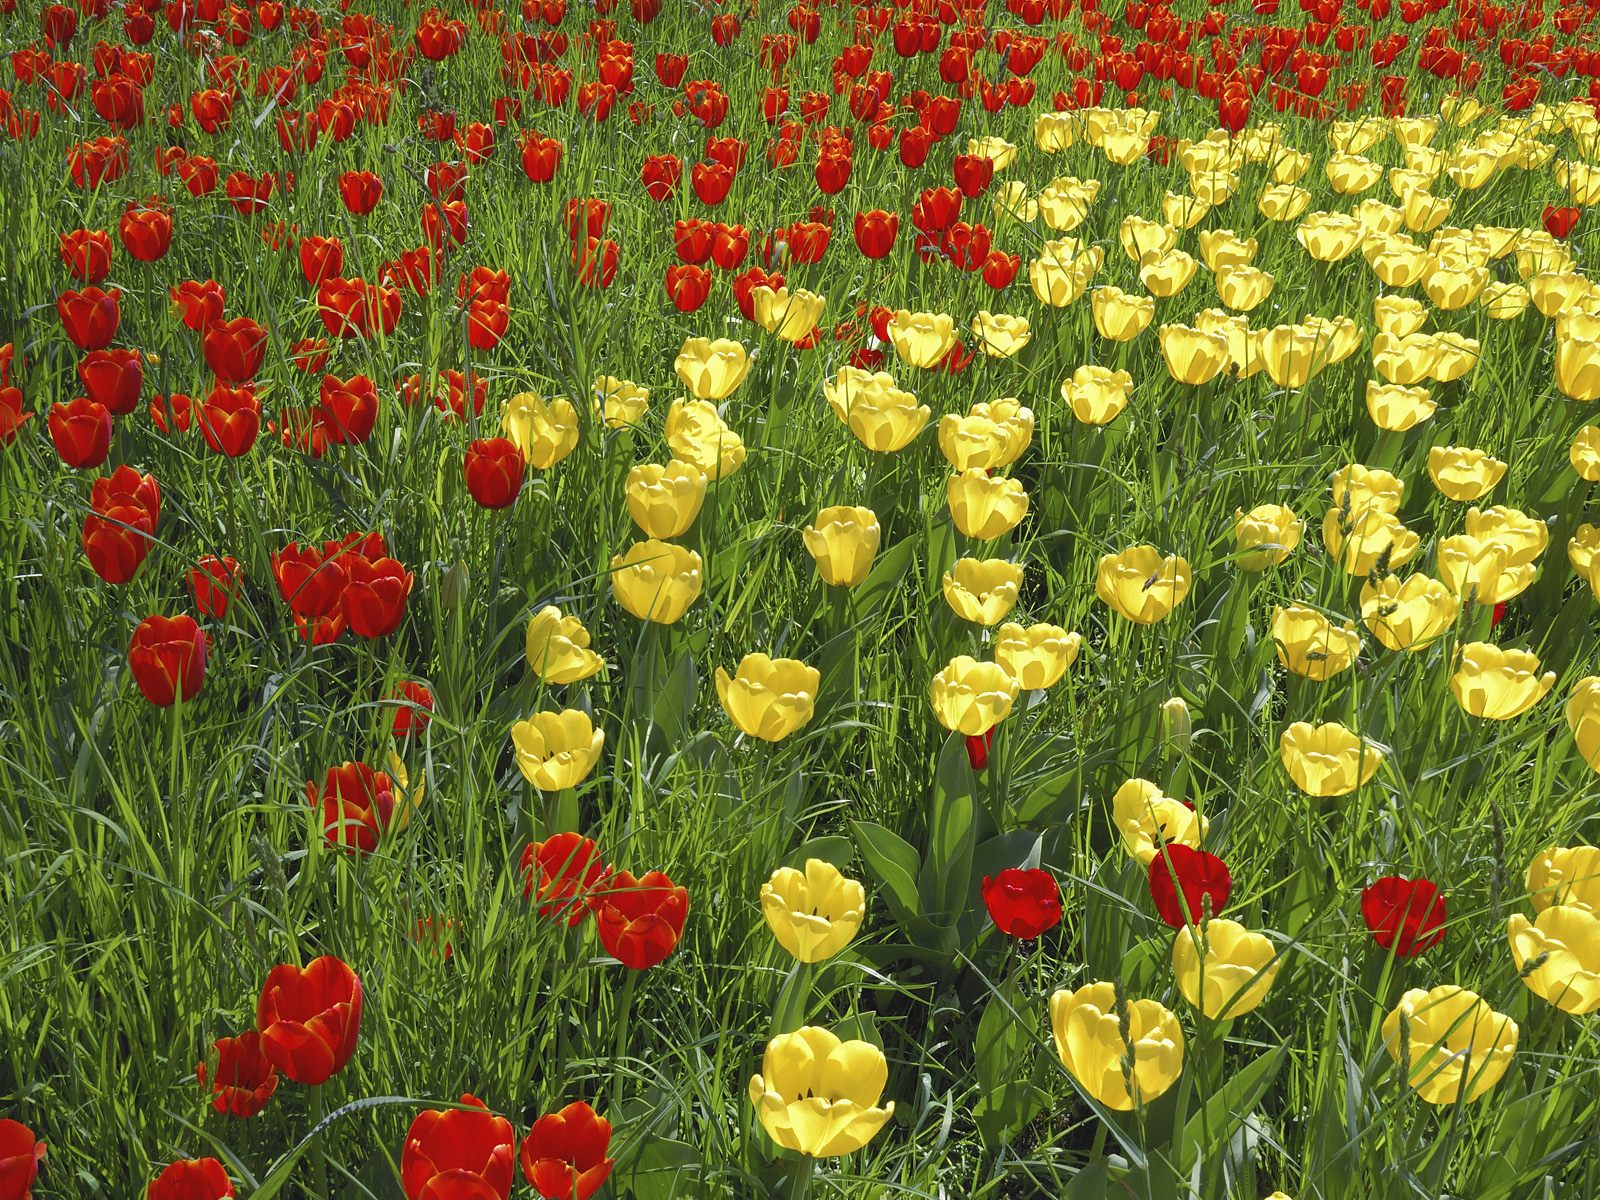 flowers, Grass, Tulips, Yellow, Flowers, Red, Flowers Wallpaper